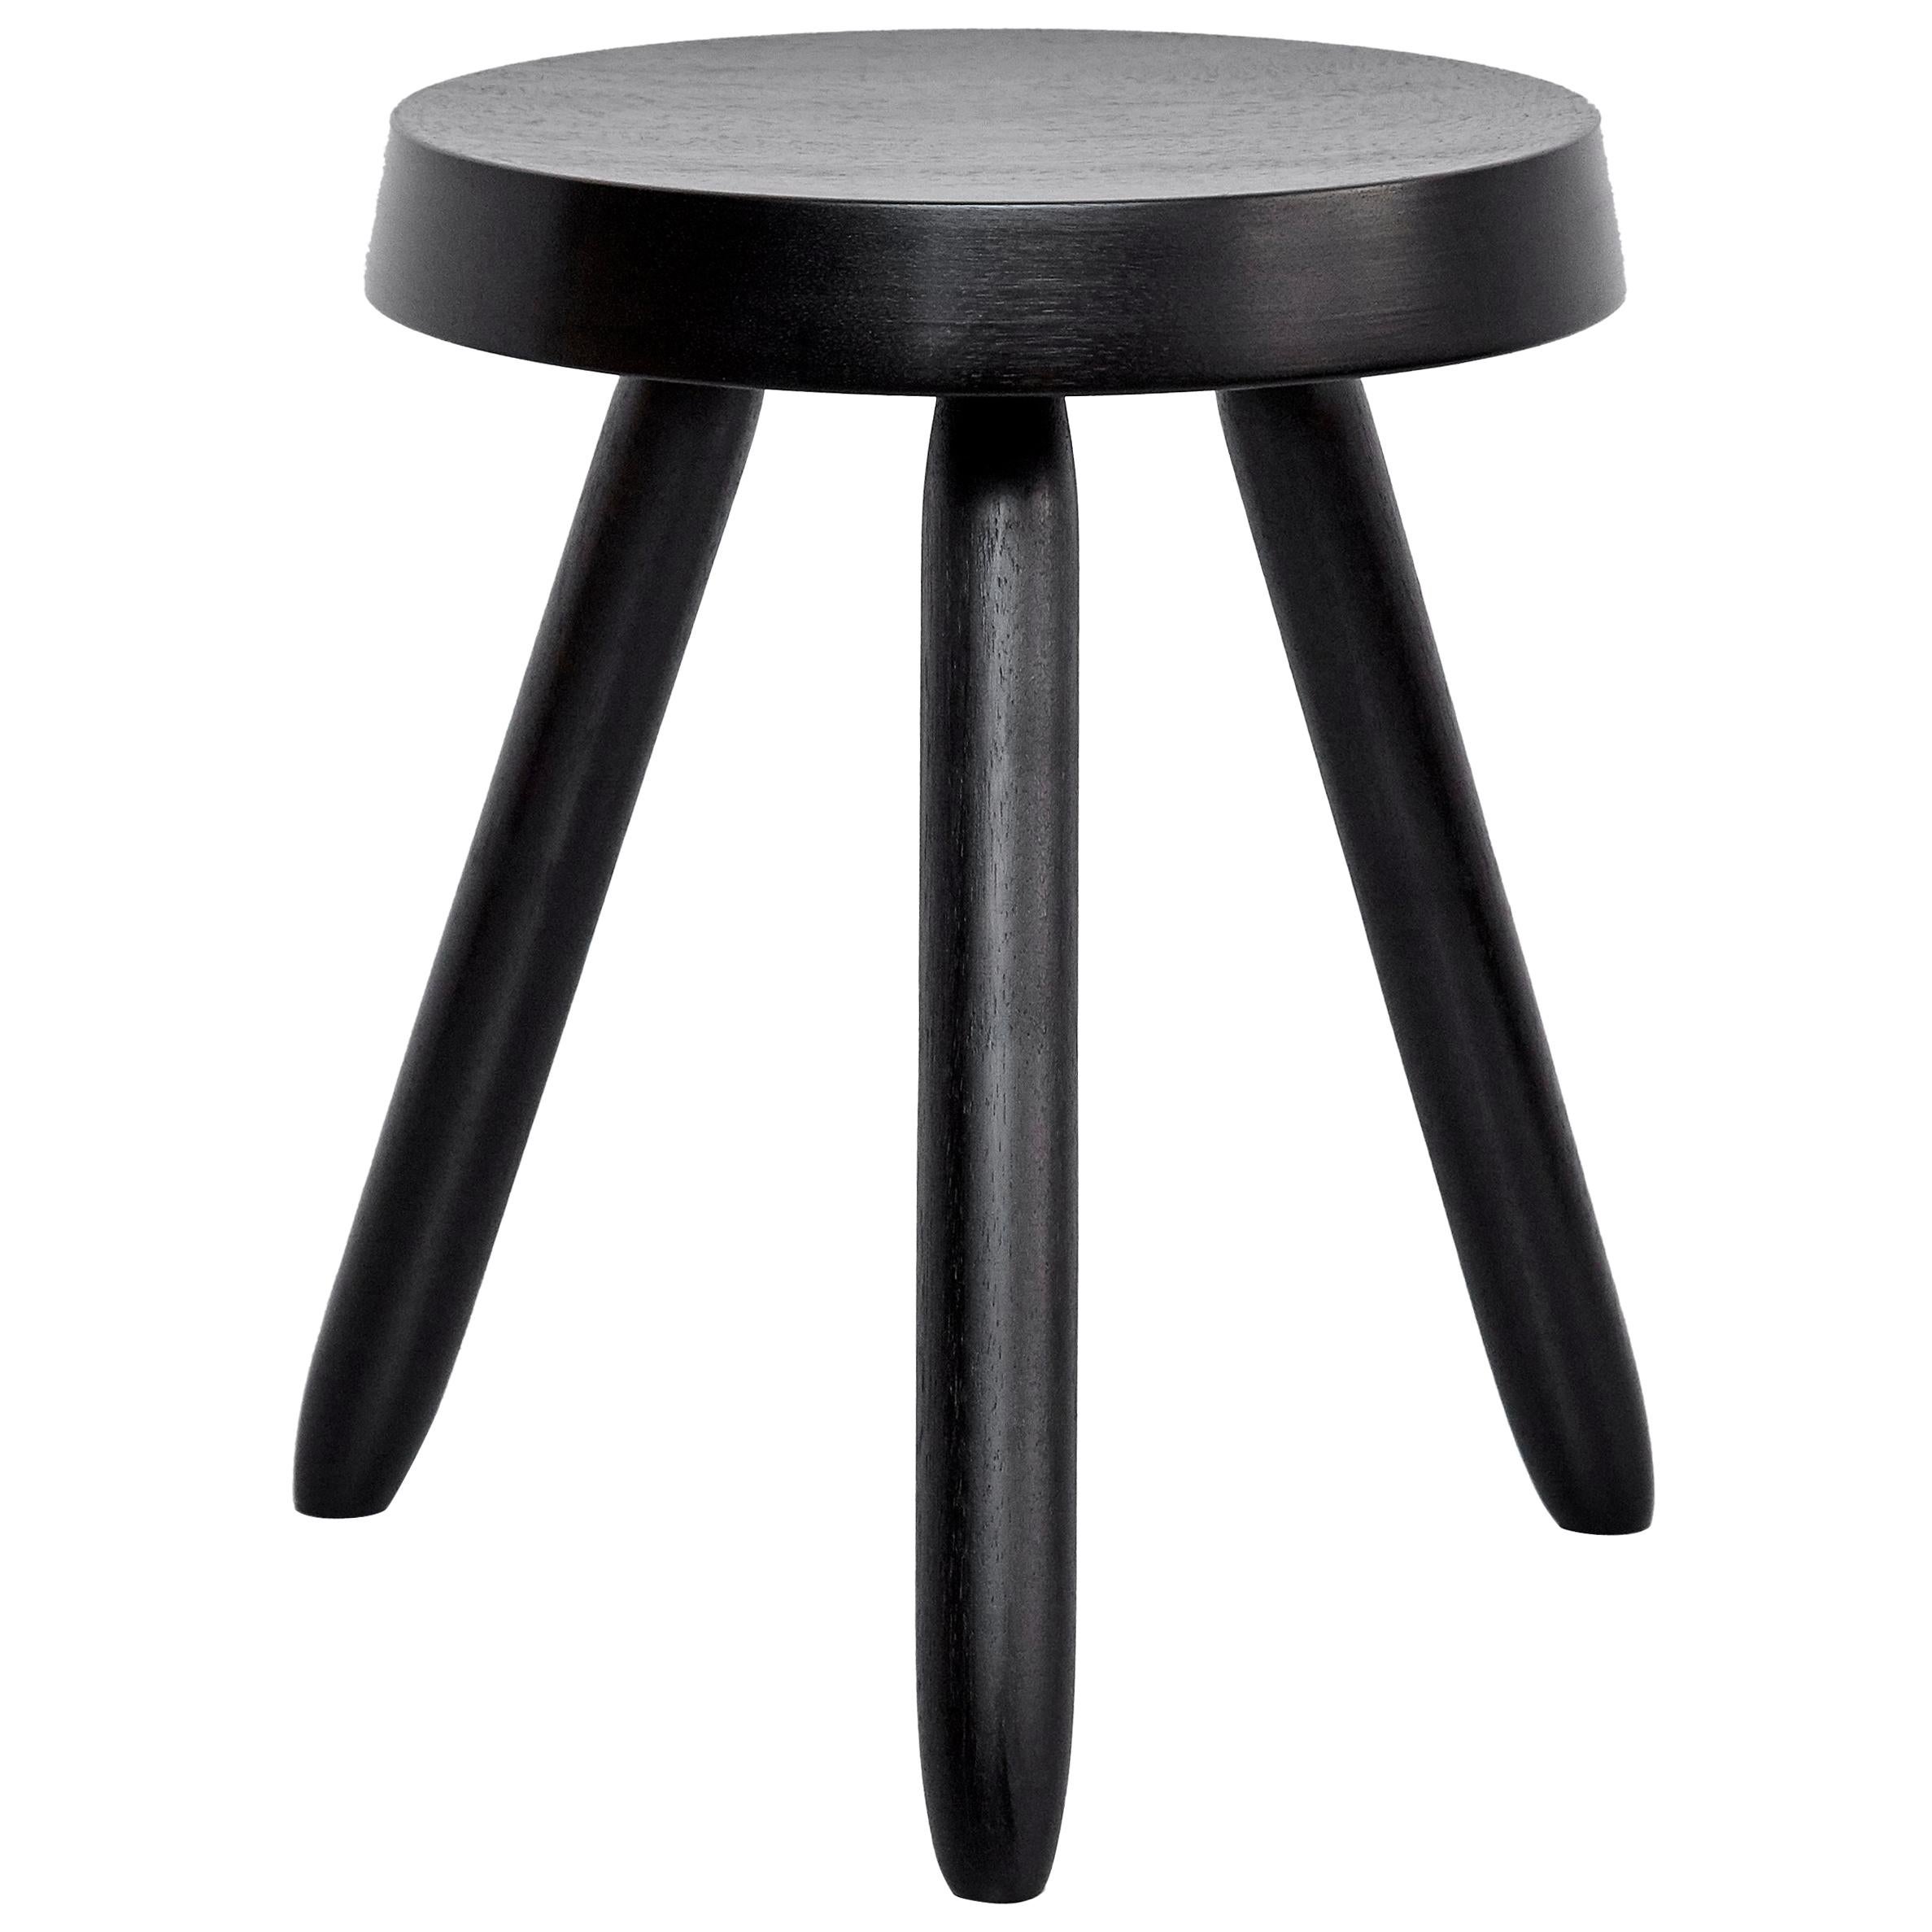 After Charlotte Perriand, Mid Century Modern Black Wood Stool - Free Shipping